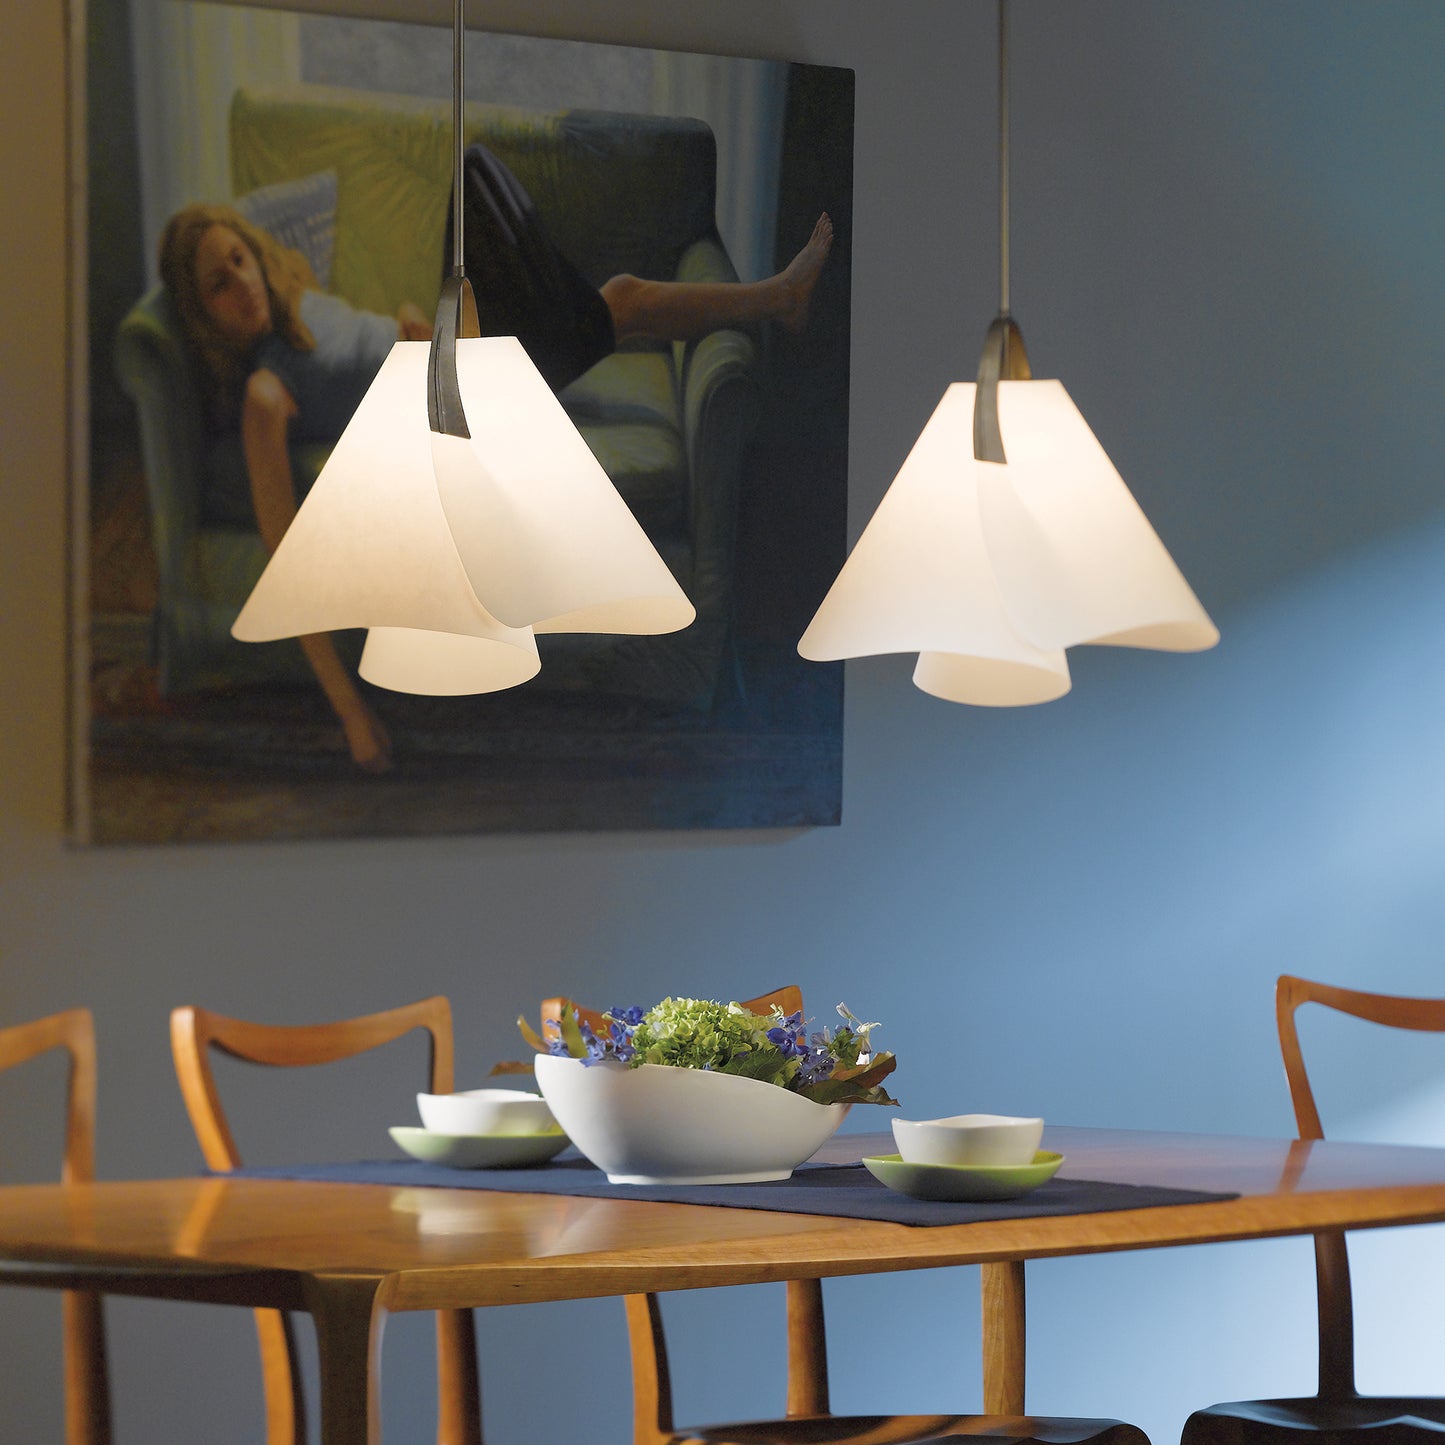 Wooden dining room table adorned with Hubbardton Forge lighting, featuring the elegant Hubbardton Forge Mobius Small Pendant.